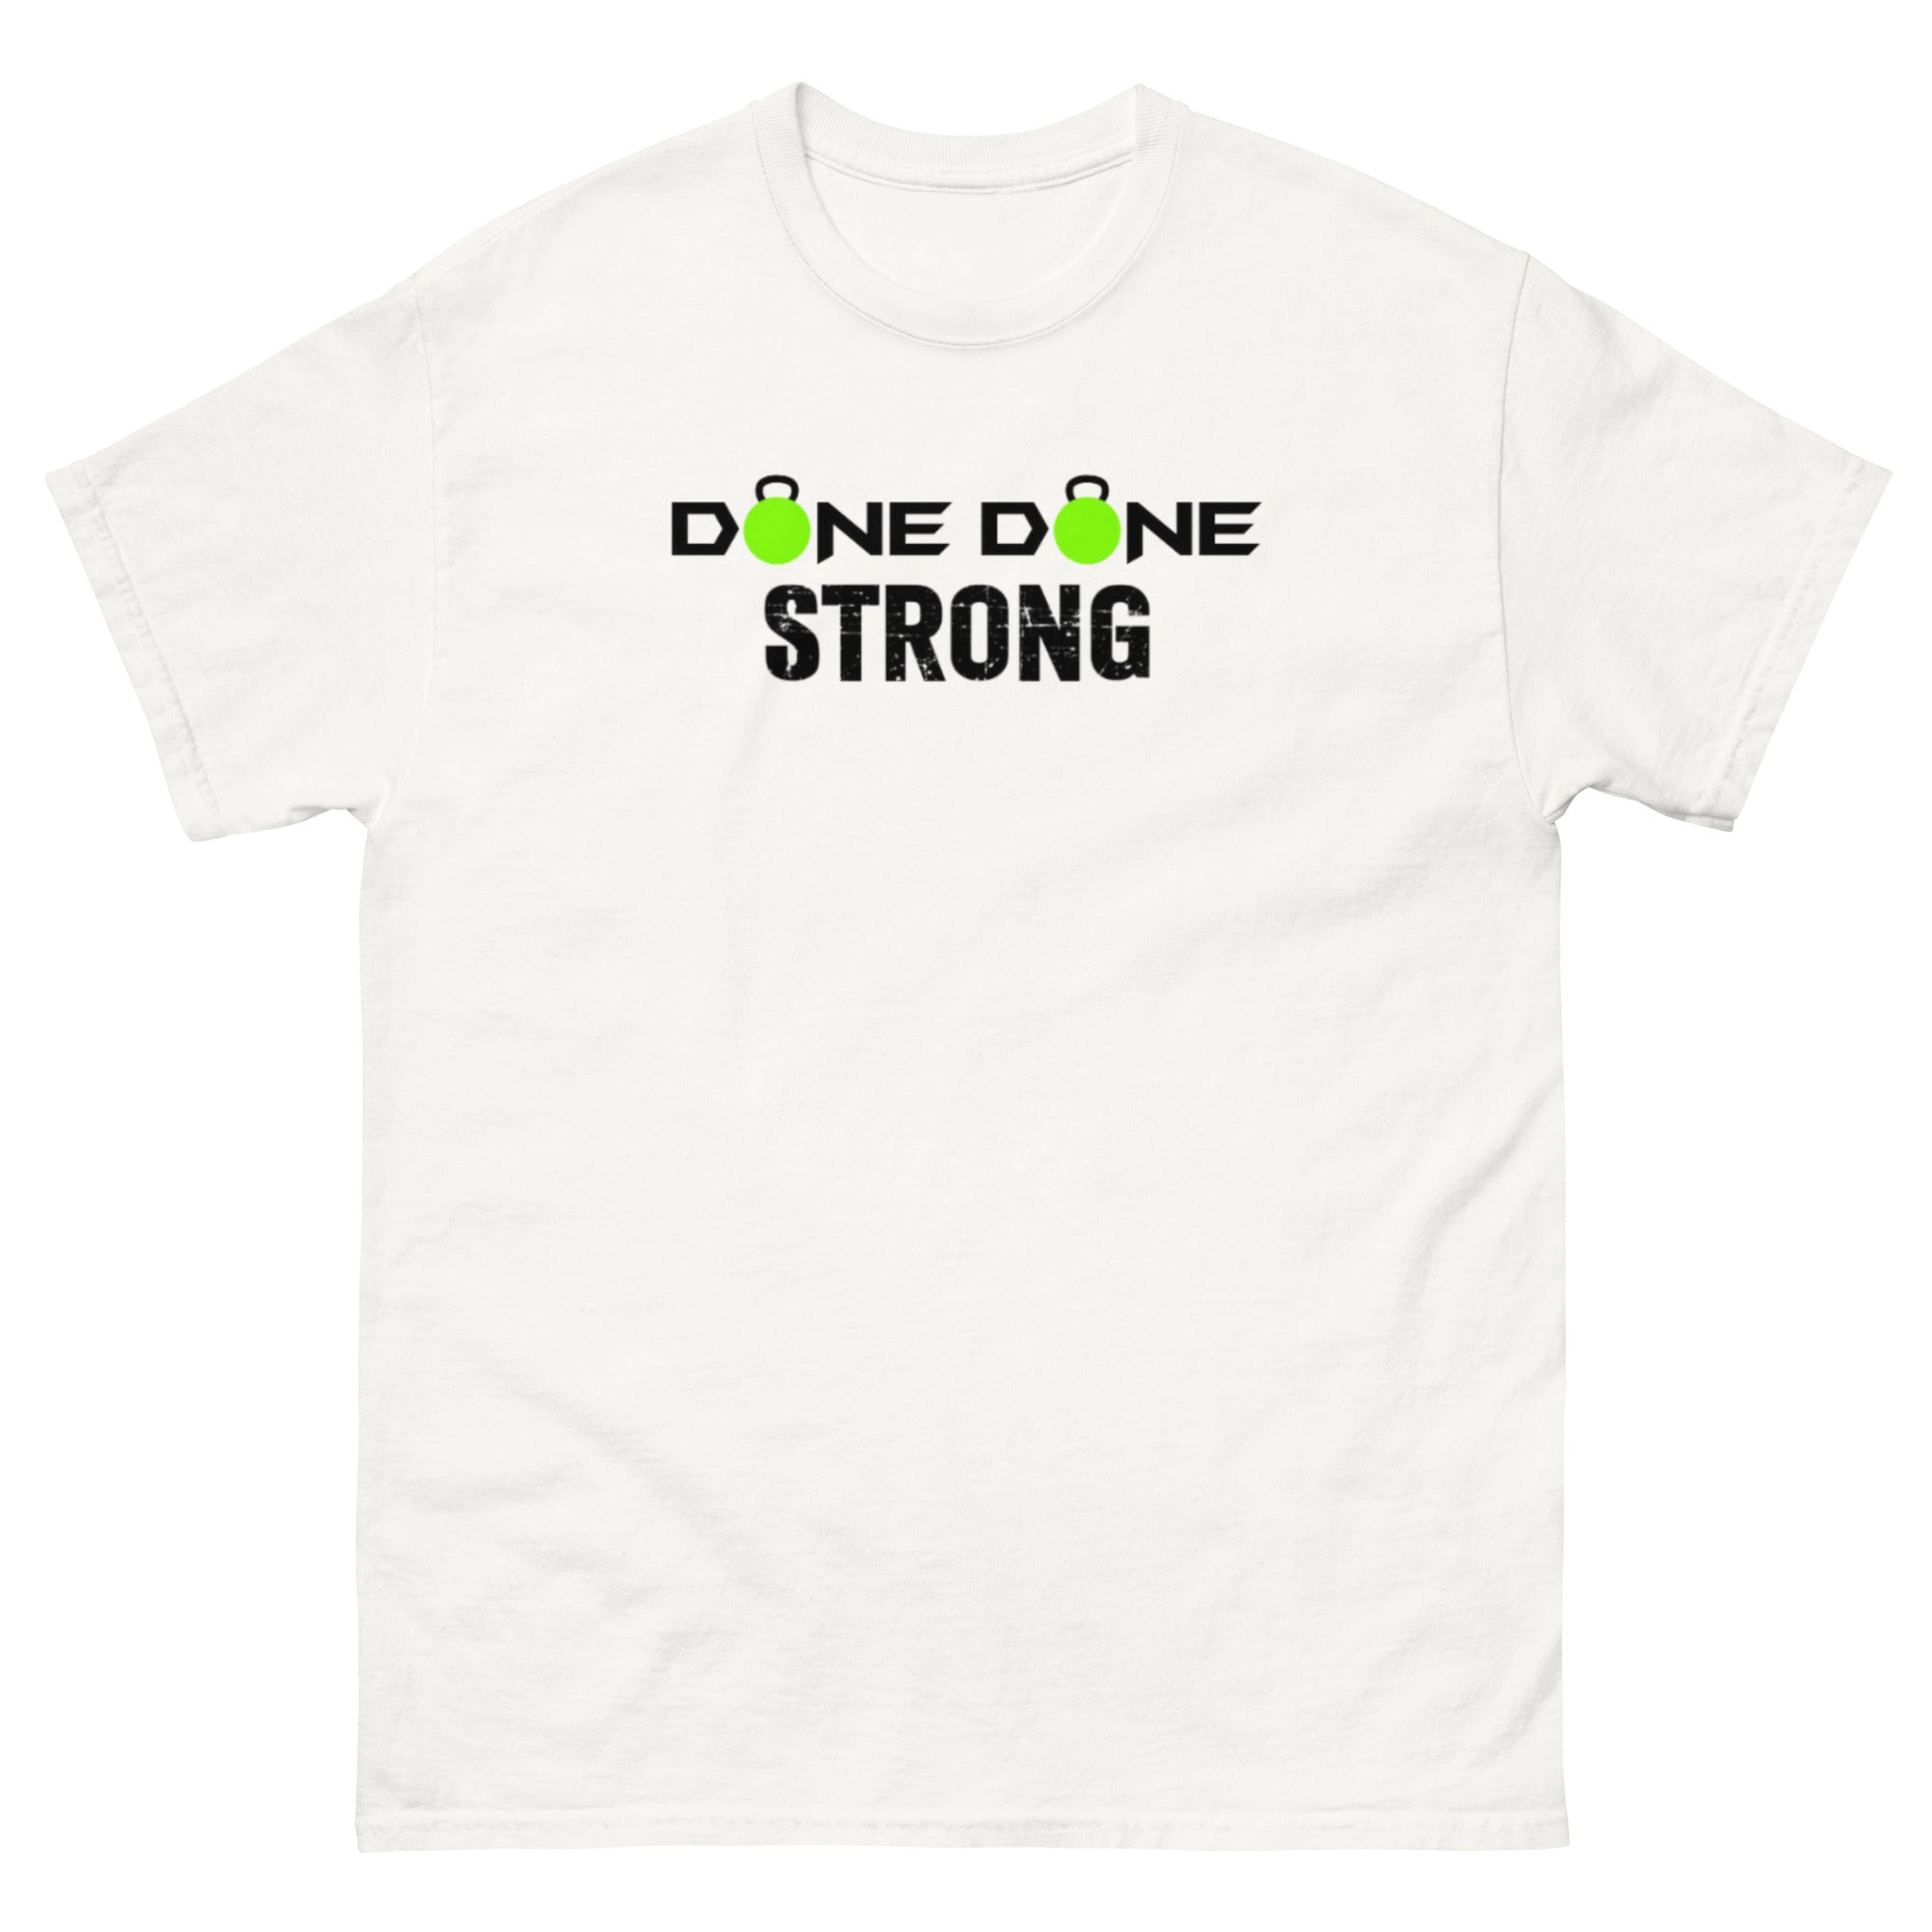 Done Done Strong Men's classic tee